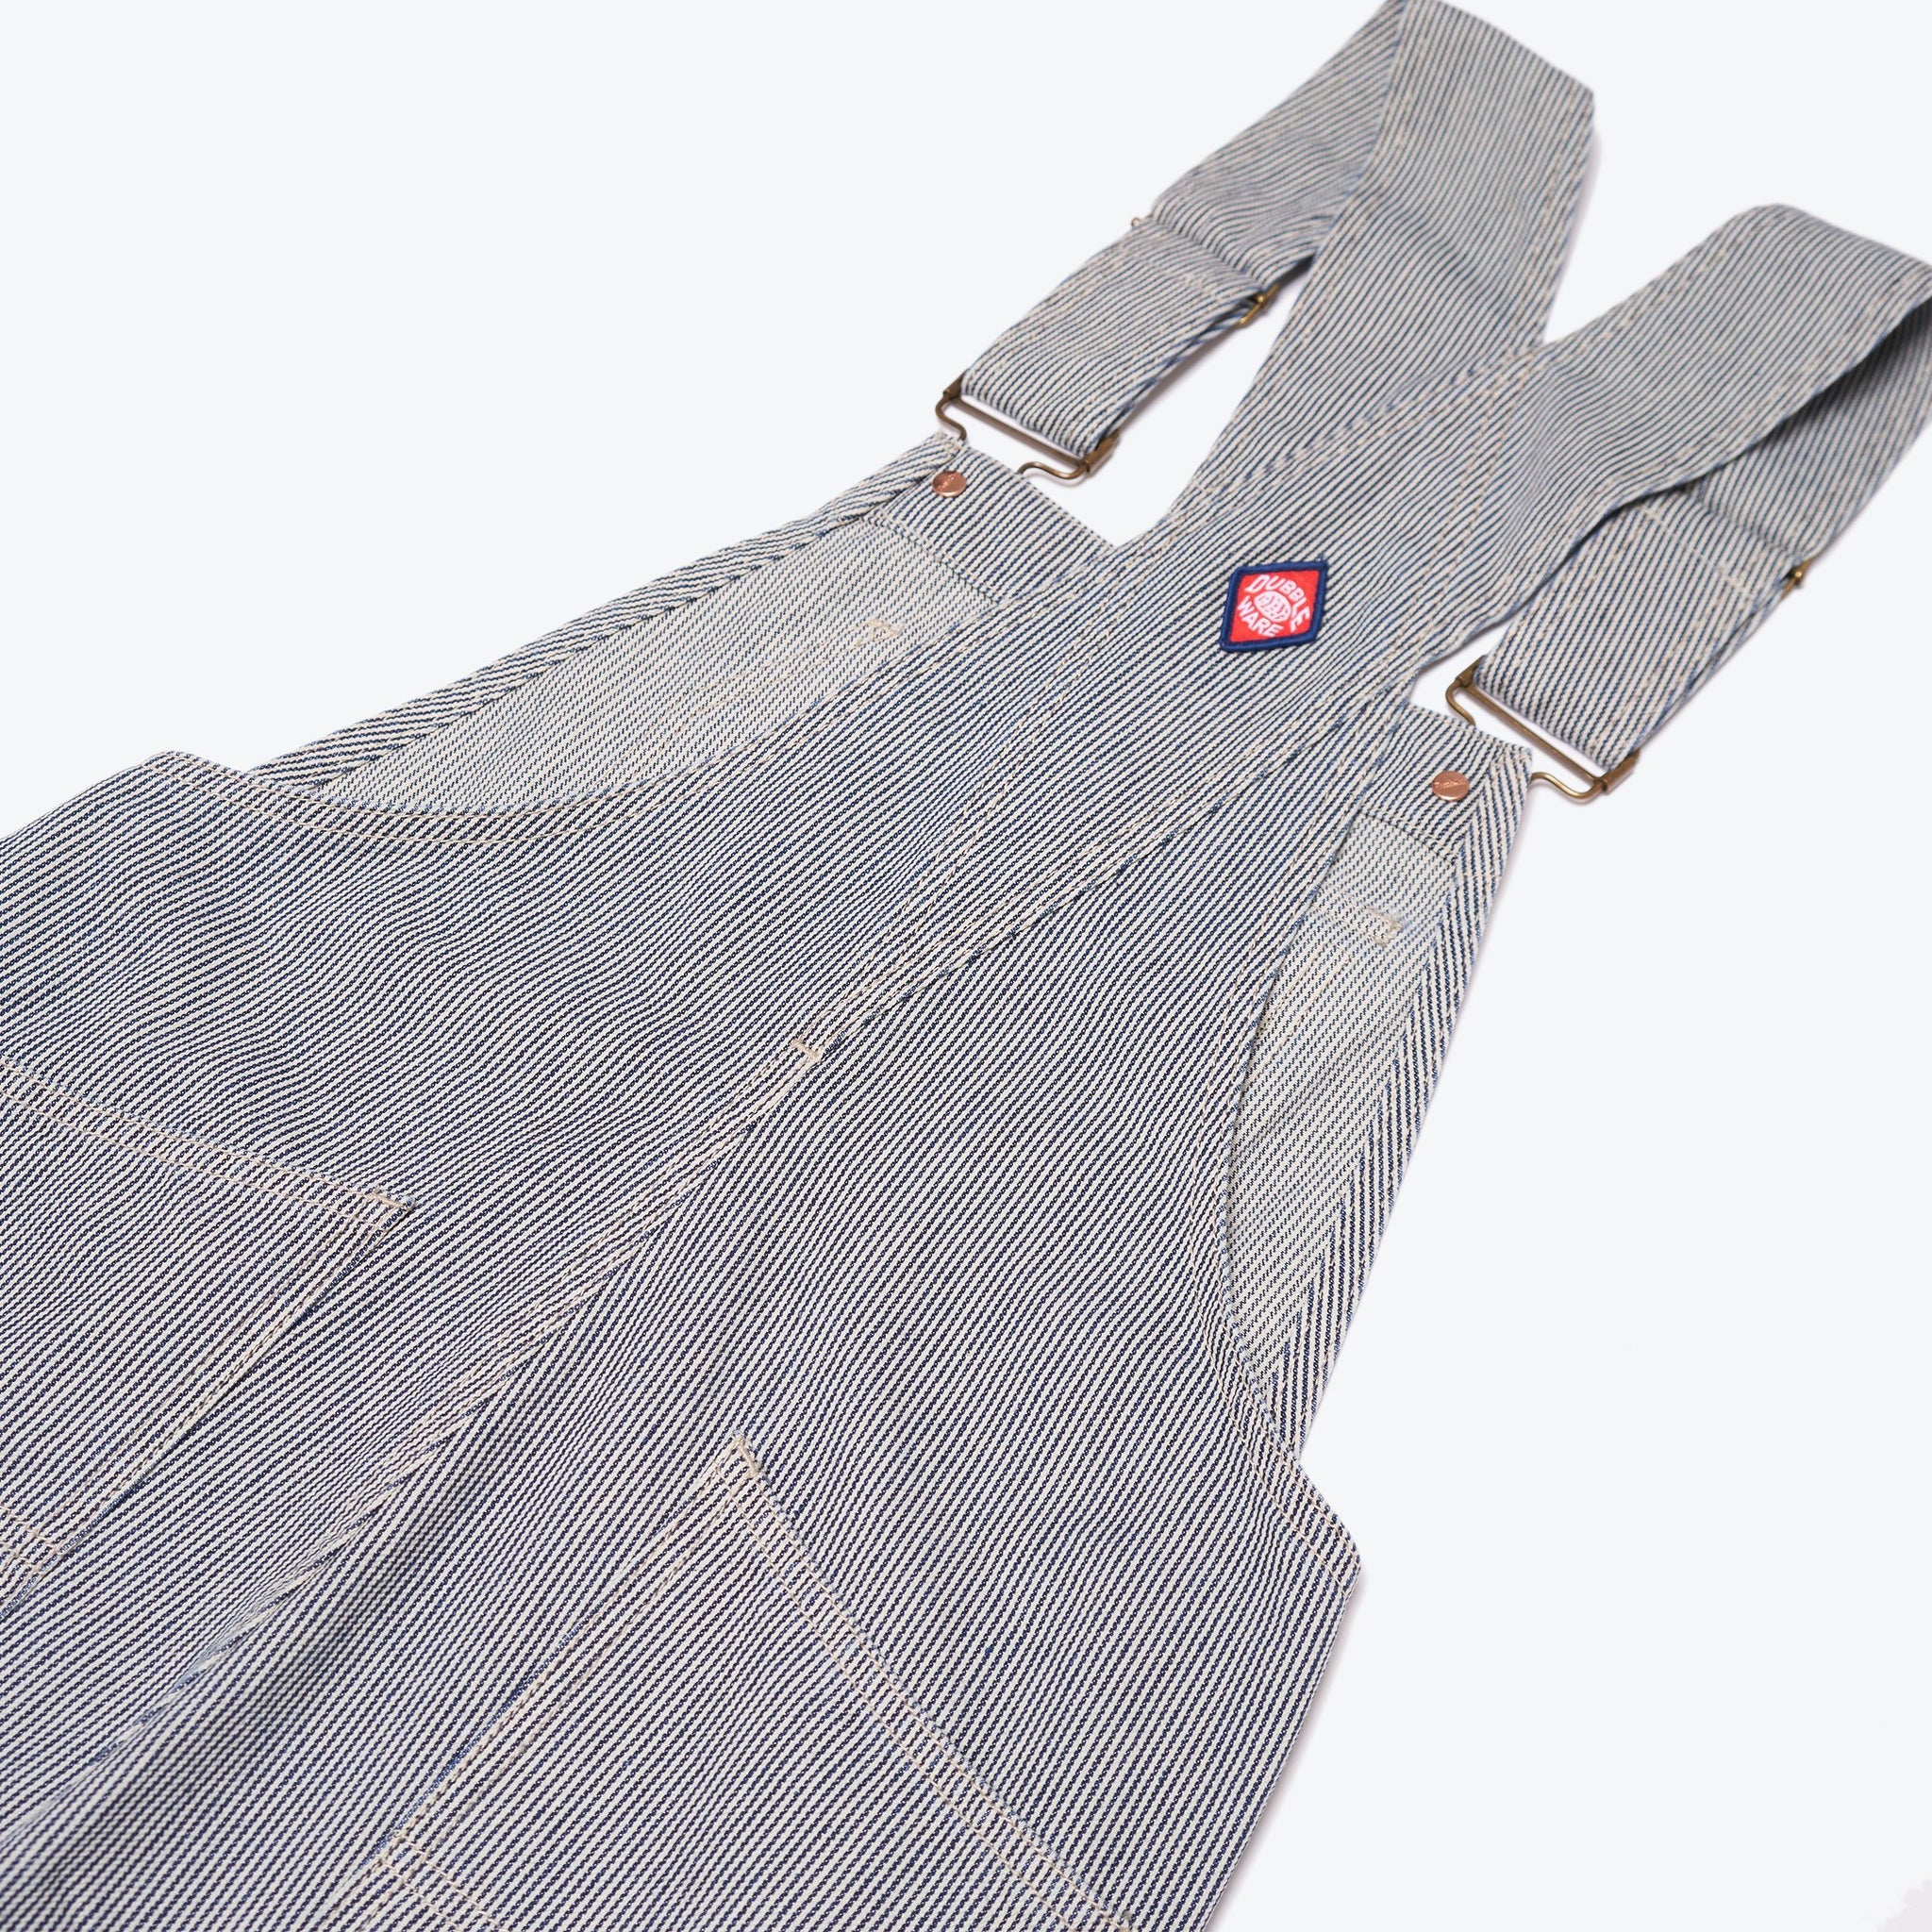 Women's Dungarees - Hickory